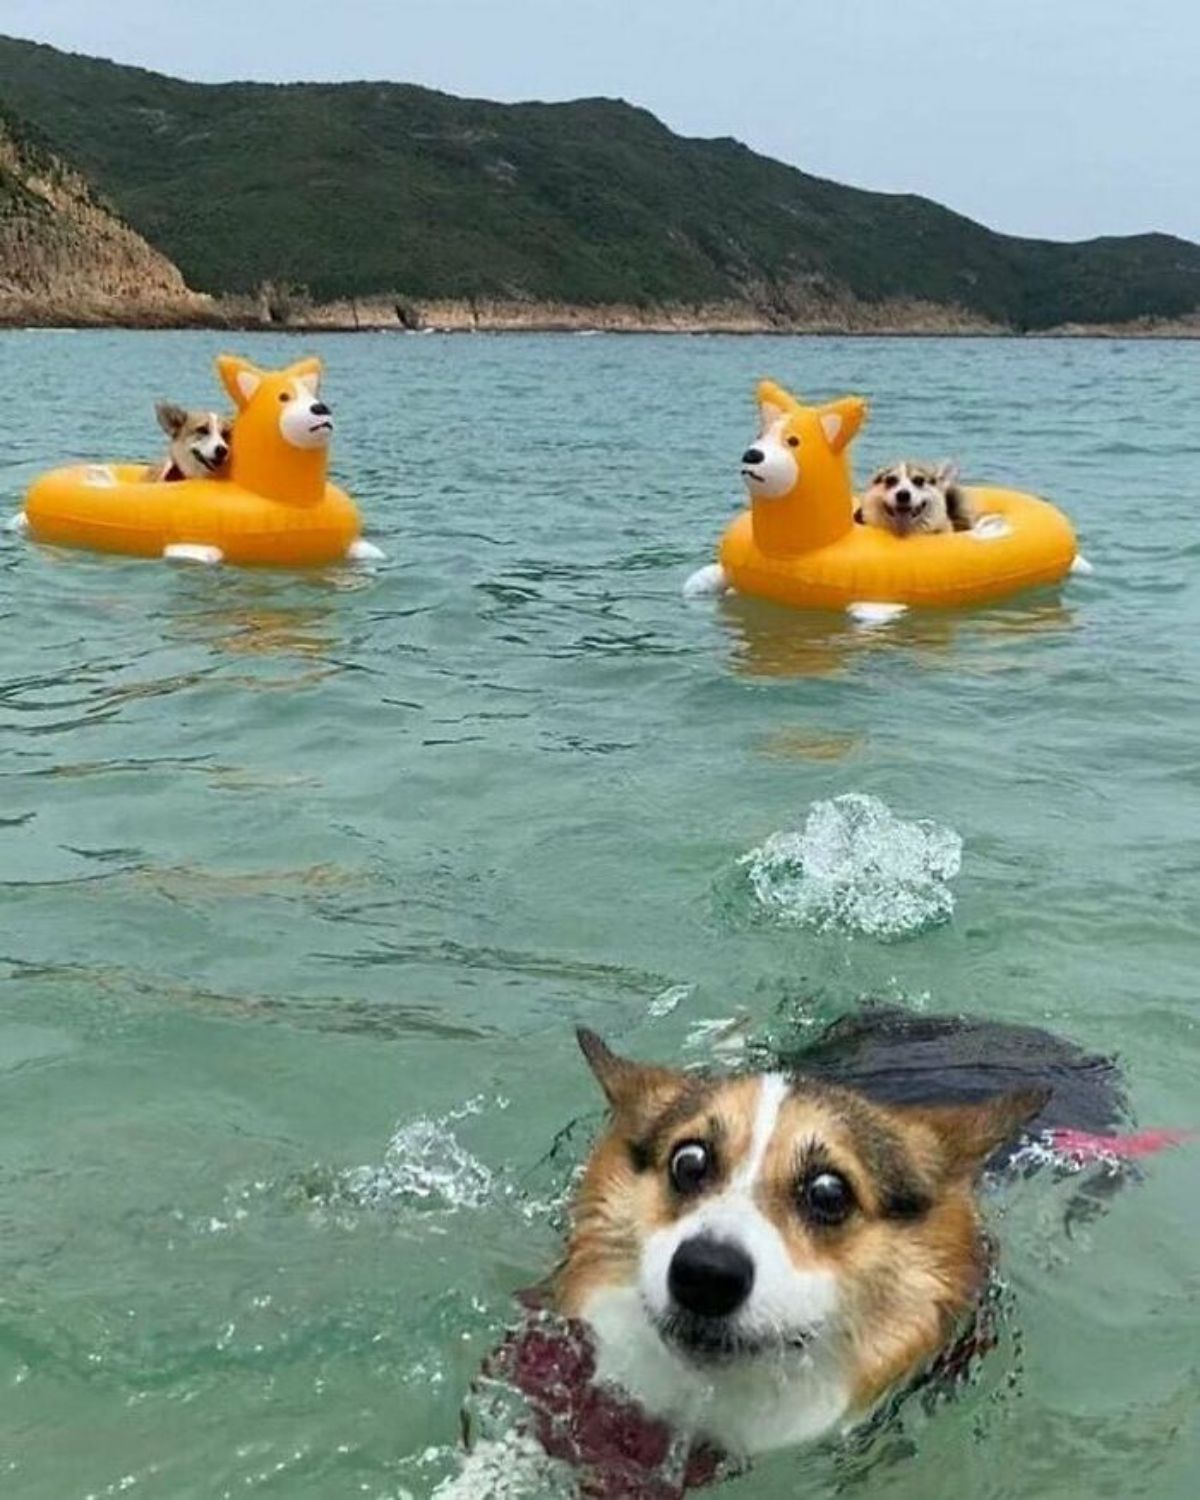 2 brown and white corgis sitting in orange and white corgi floats in water with a brown white and black corgi swimming in the ocean looking scared